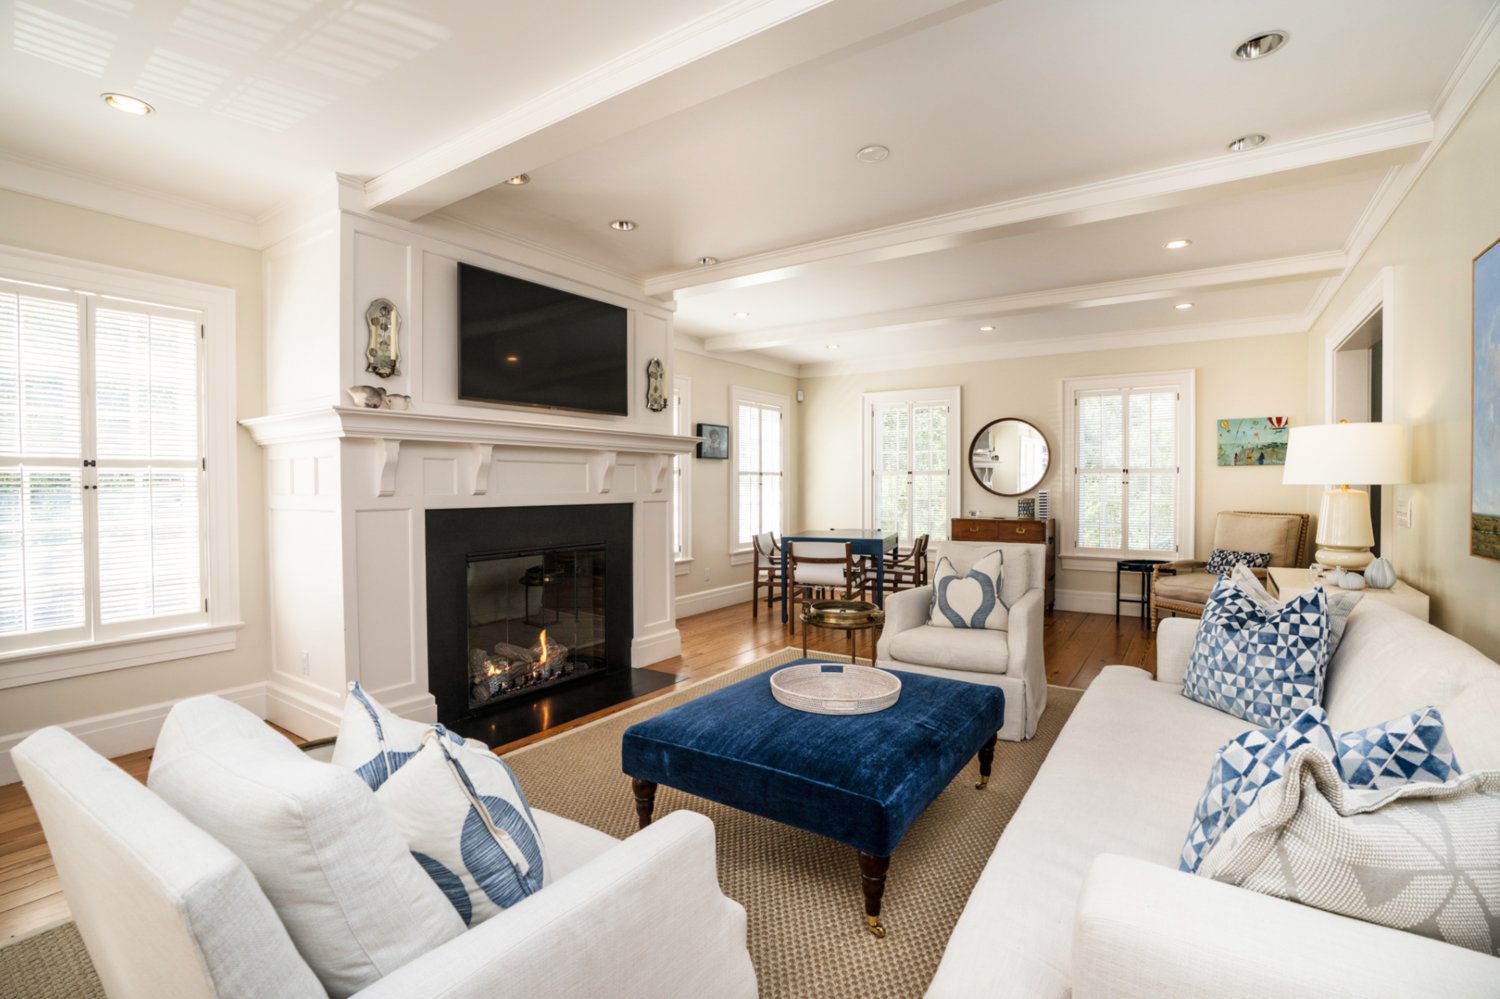 This living area has a fireplace, built-in cabinets and French-door access to the porch.